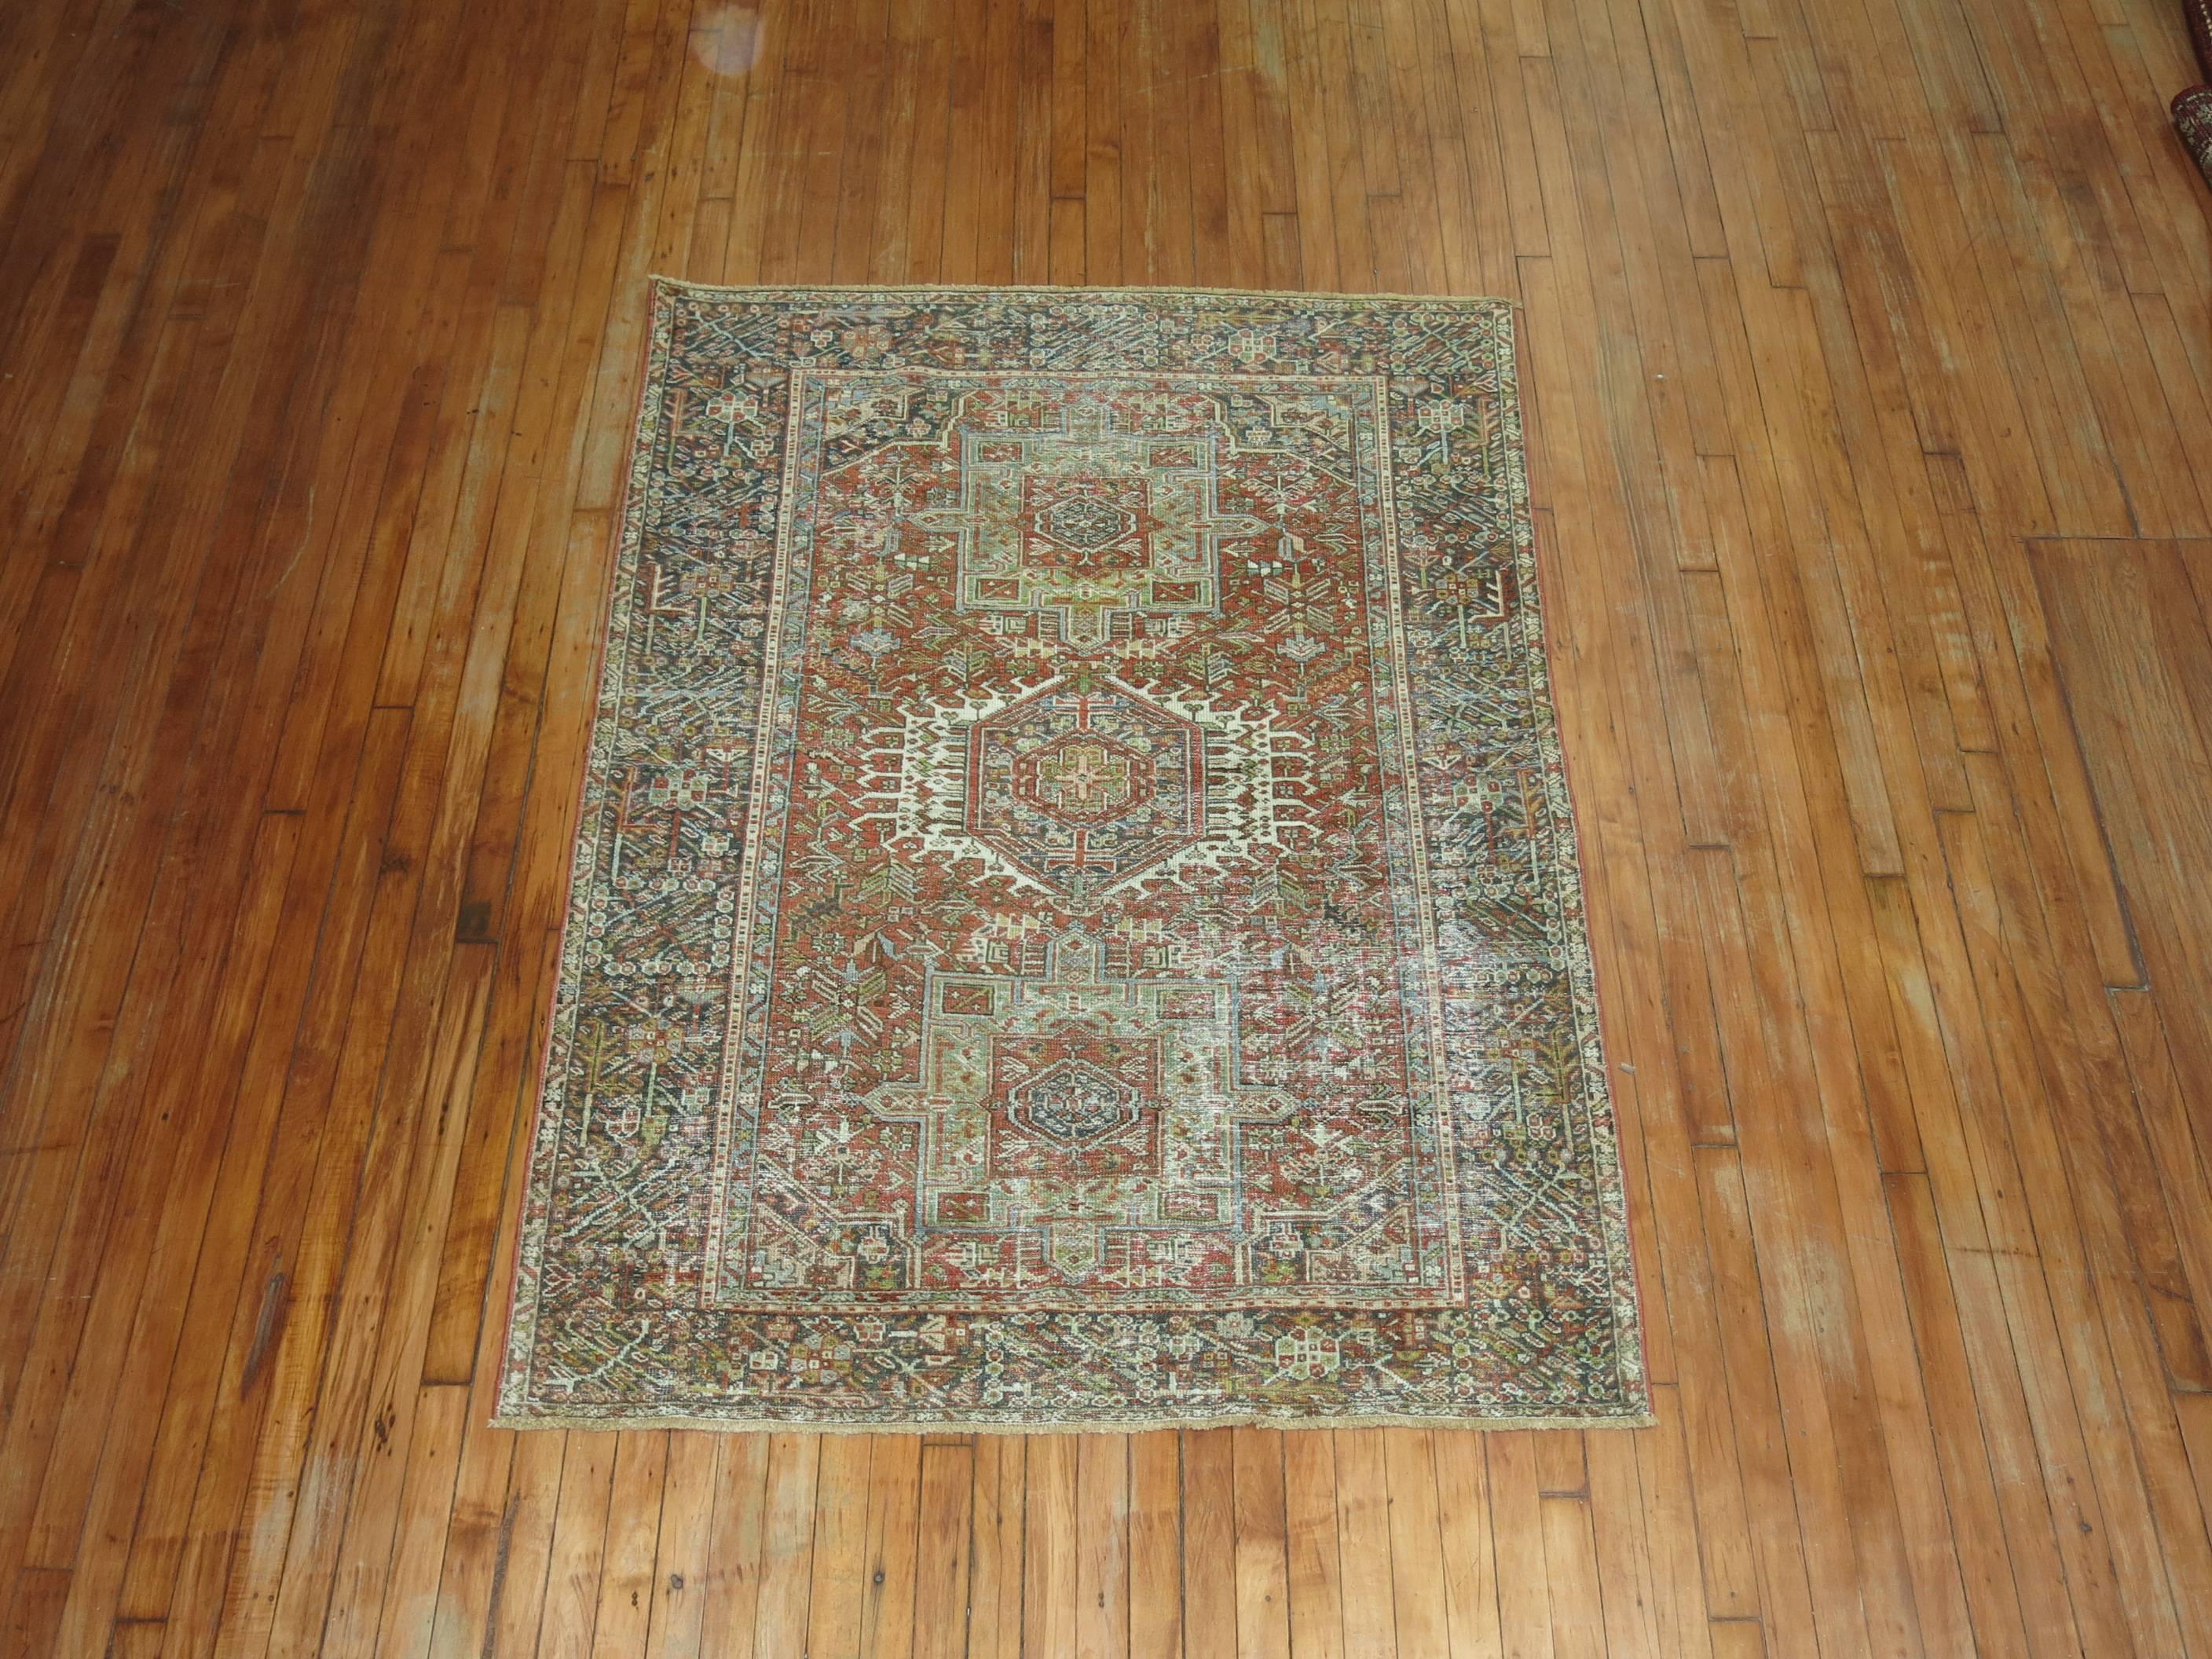 Intermediate size shabby chic Persian Heriz rug, accents in soft red, green, brown.

4'5'' x 6'